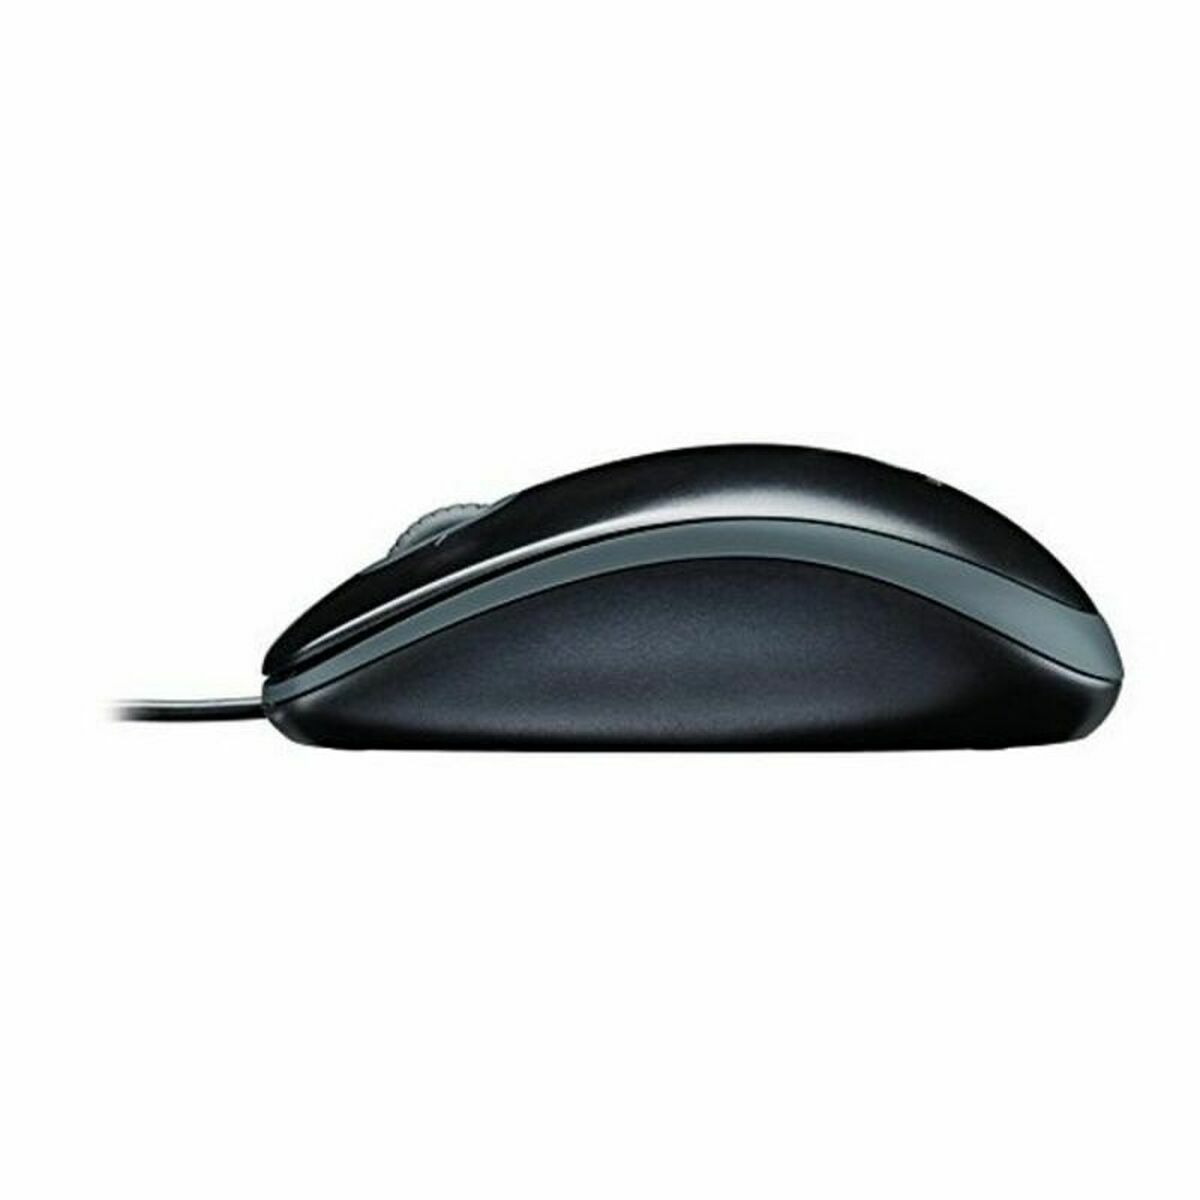 Keyboard and Mouse Logitech 920-002550 Black Spanish Qwerty